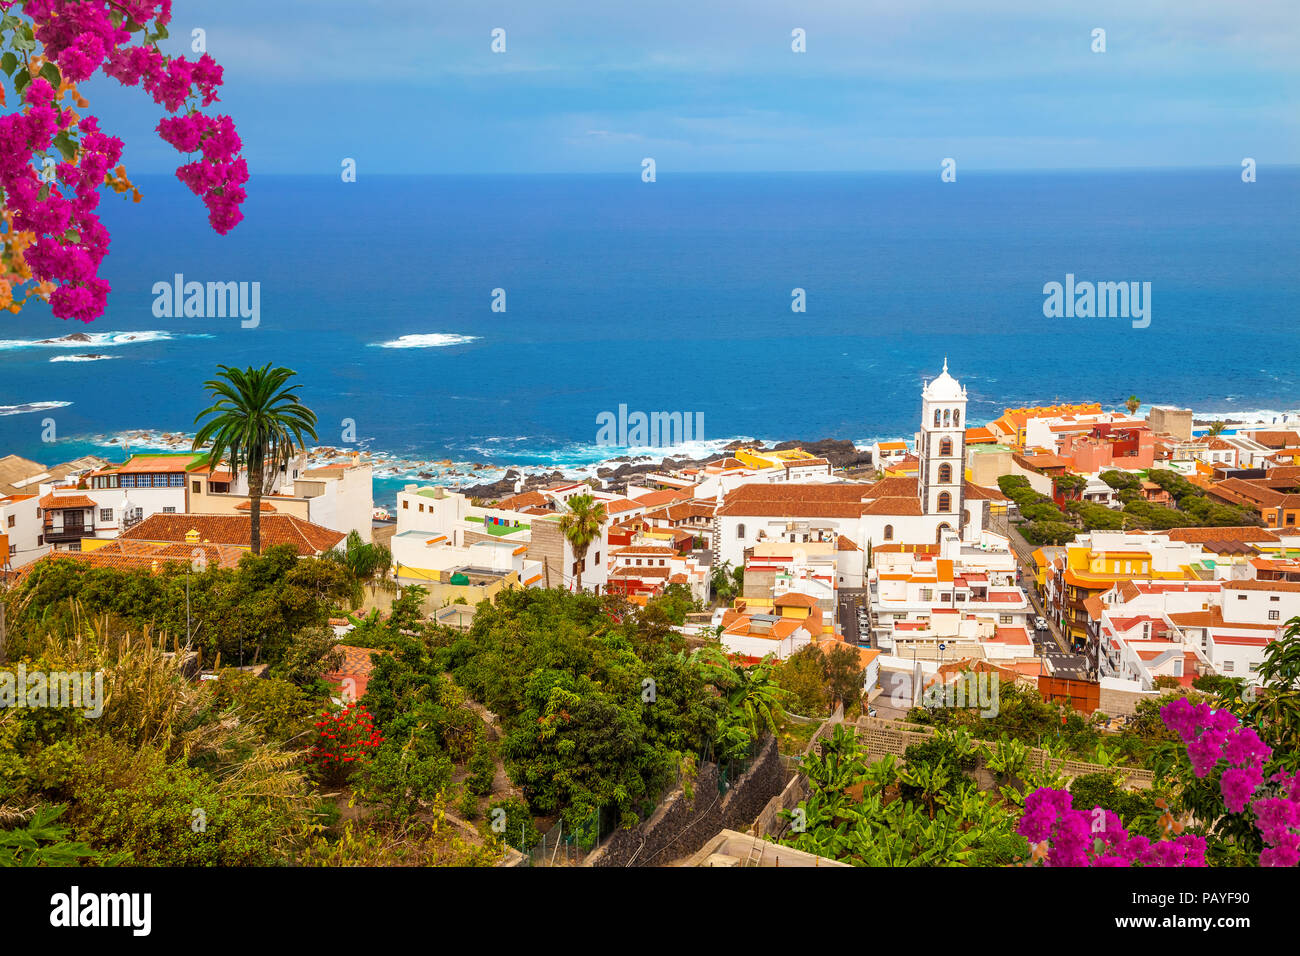 Aerial view over Garachico cityscape with traditional house architecture and the famous Santa Ana church Stock Photo